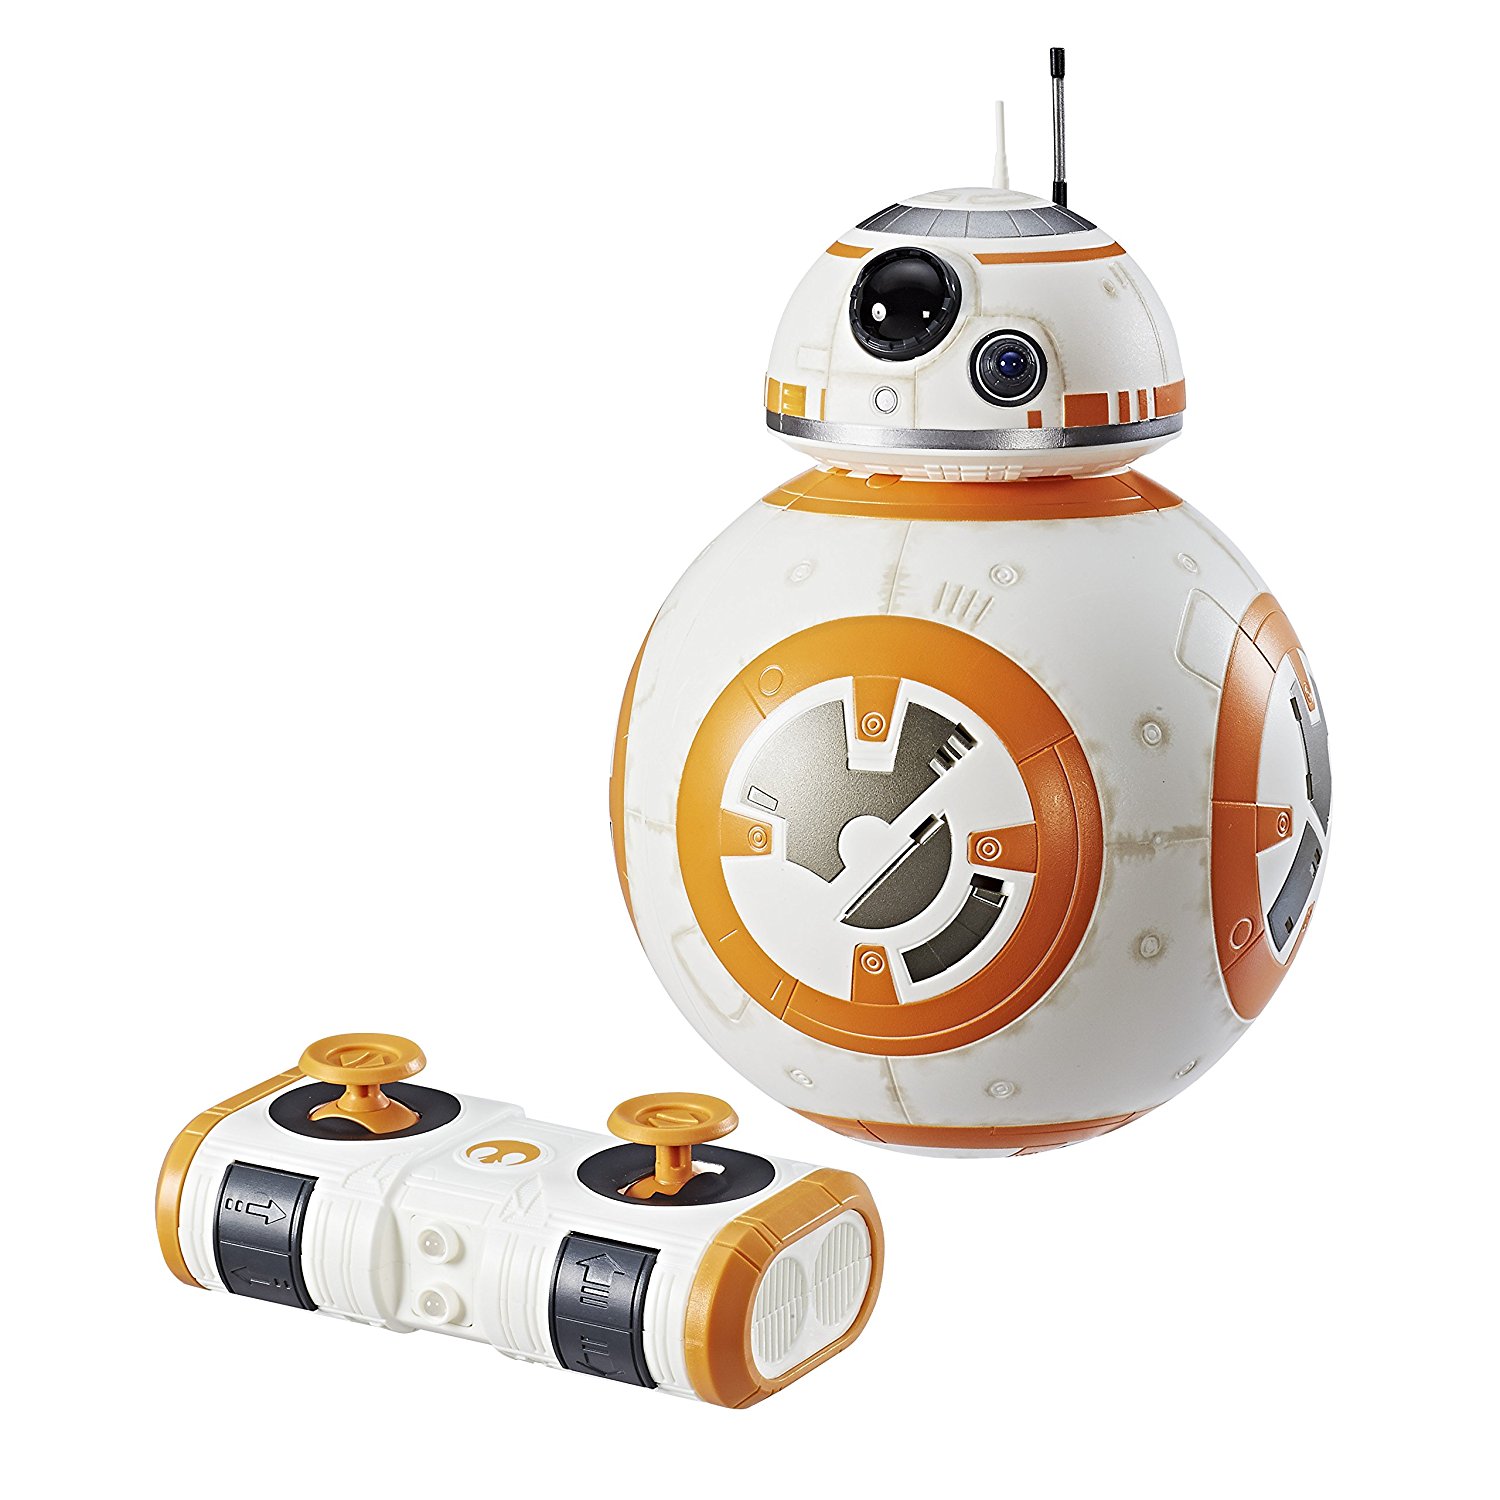 get-your-son-hyperdrive-bb-8